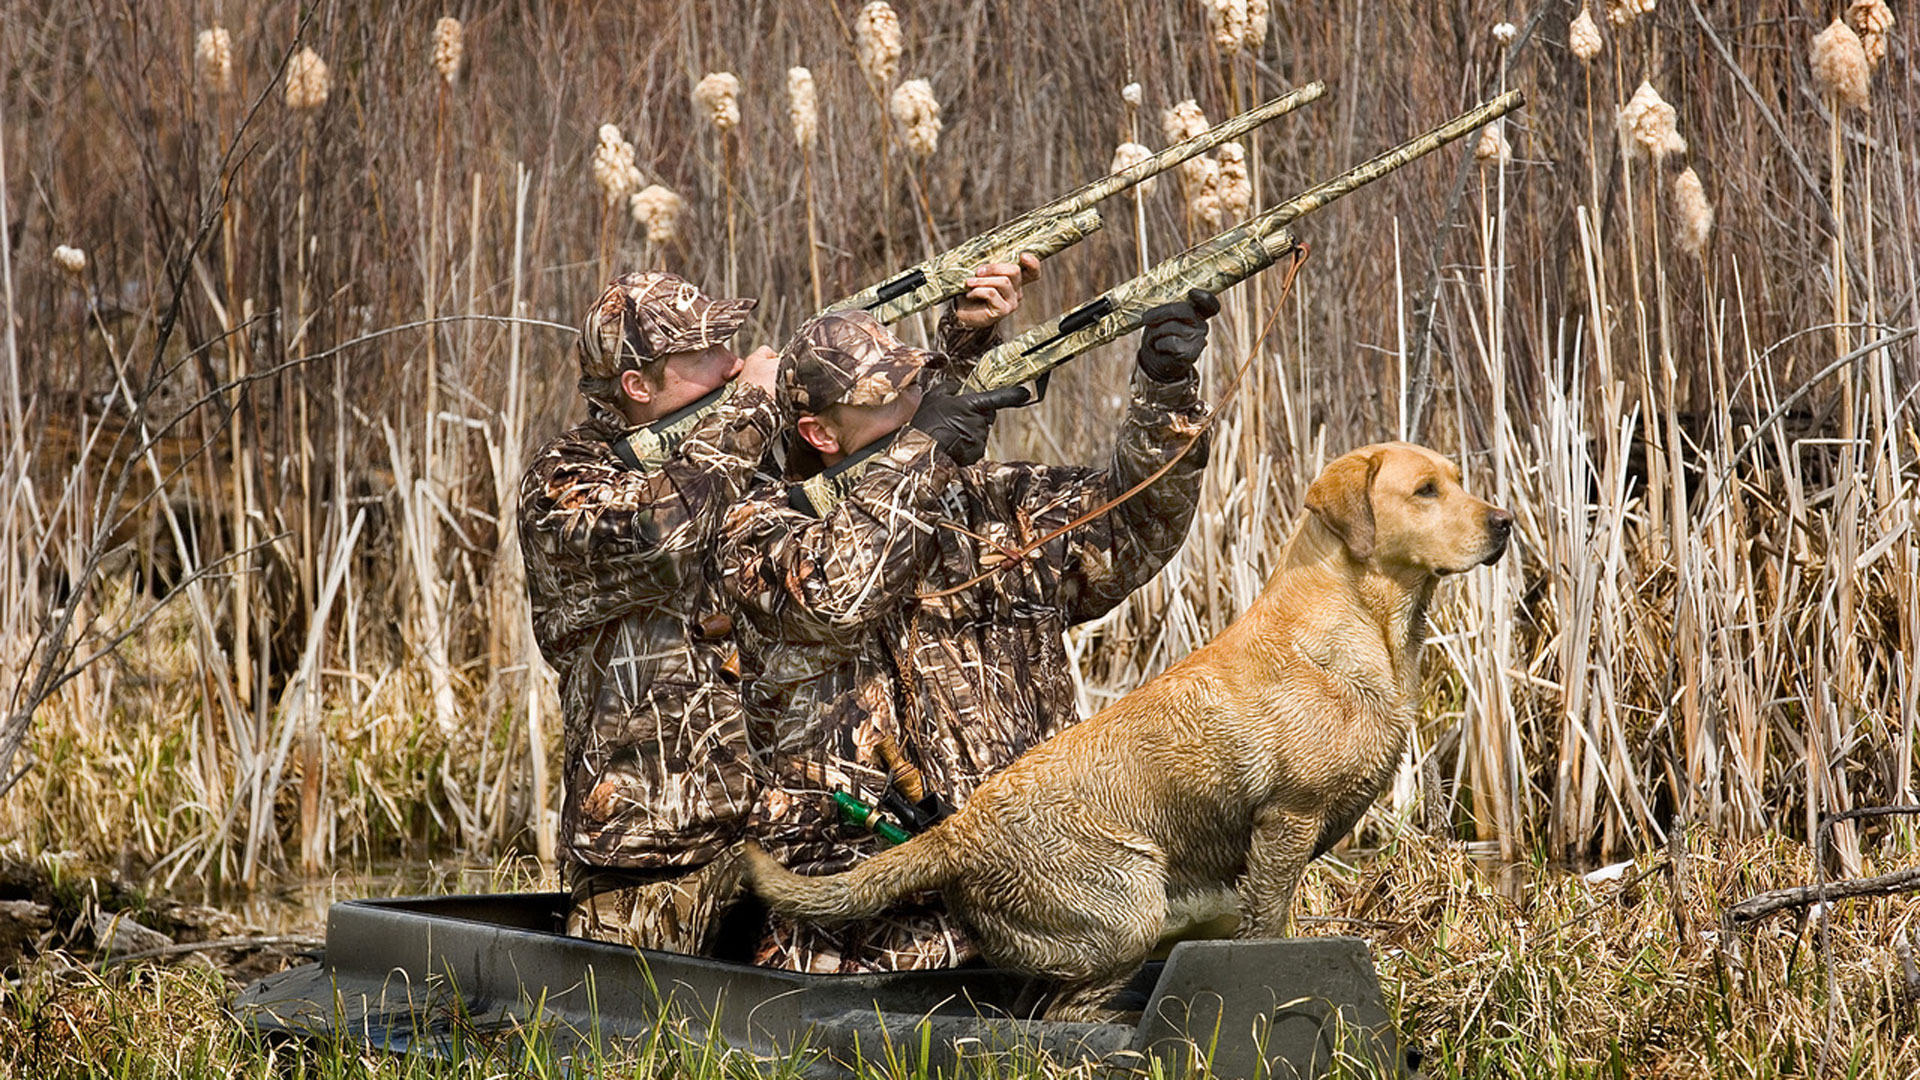 Duck Hunting Season is here! Duck Hunting Camo, Gear, & more